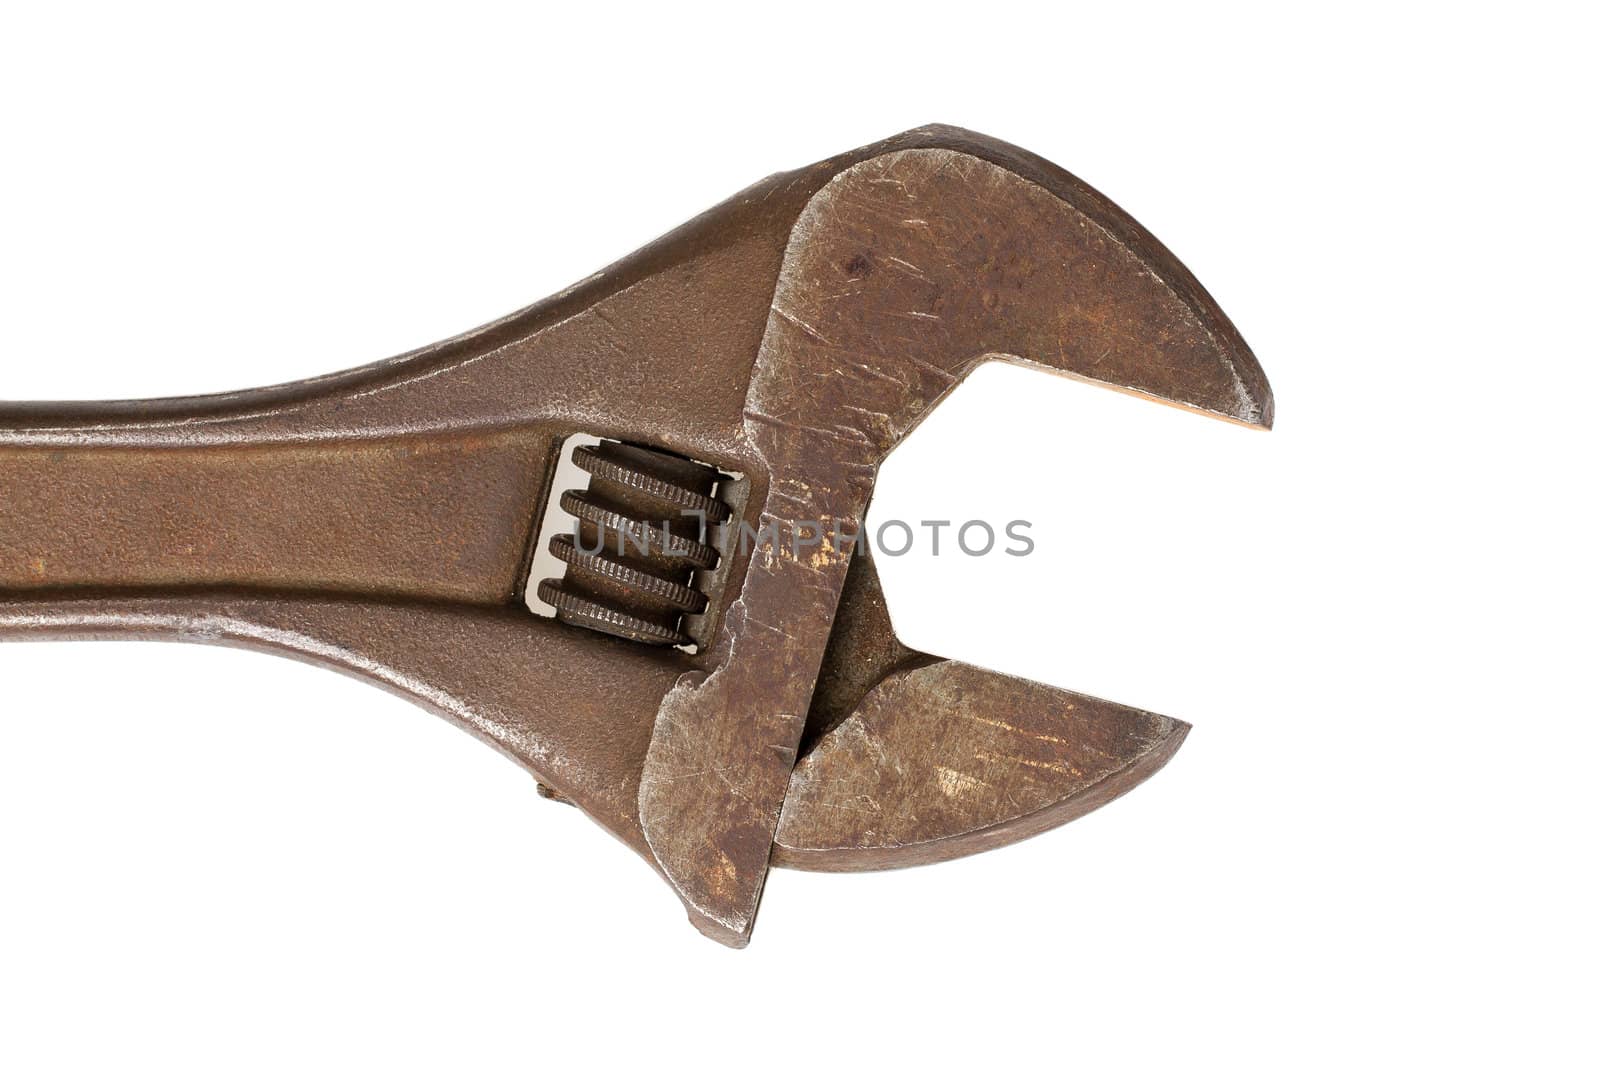 An old rusty vector wrench on a white background